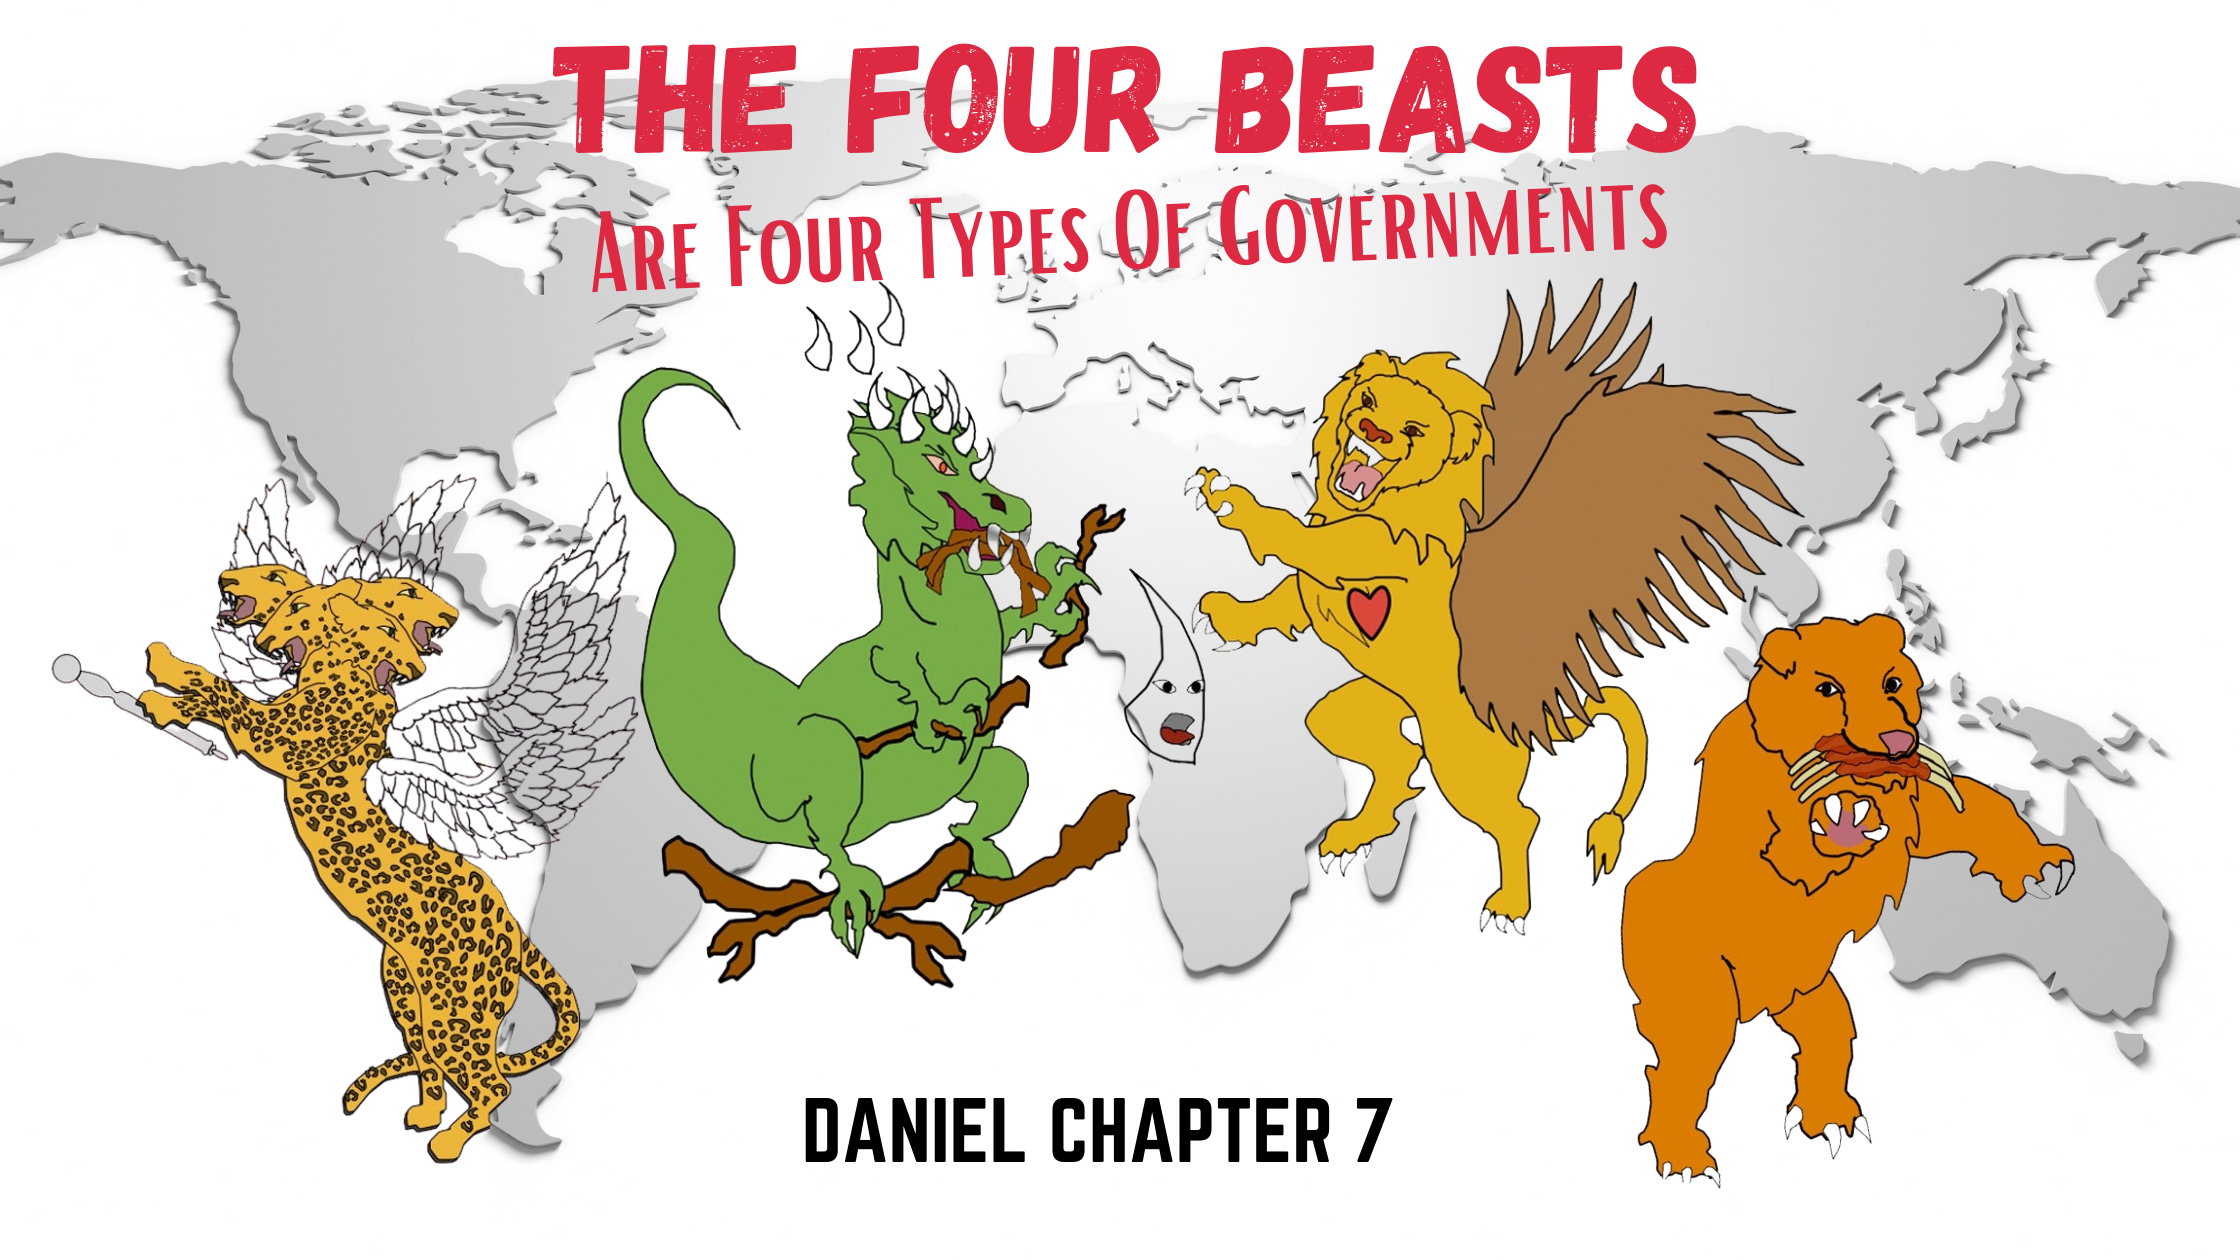 The four beasts of Daniel